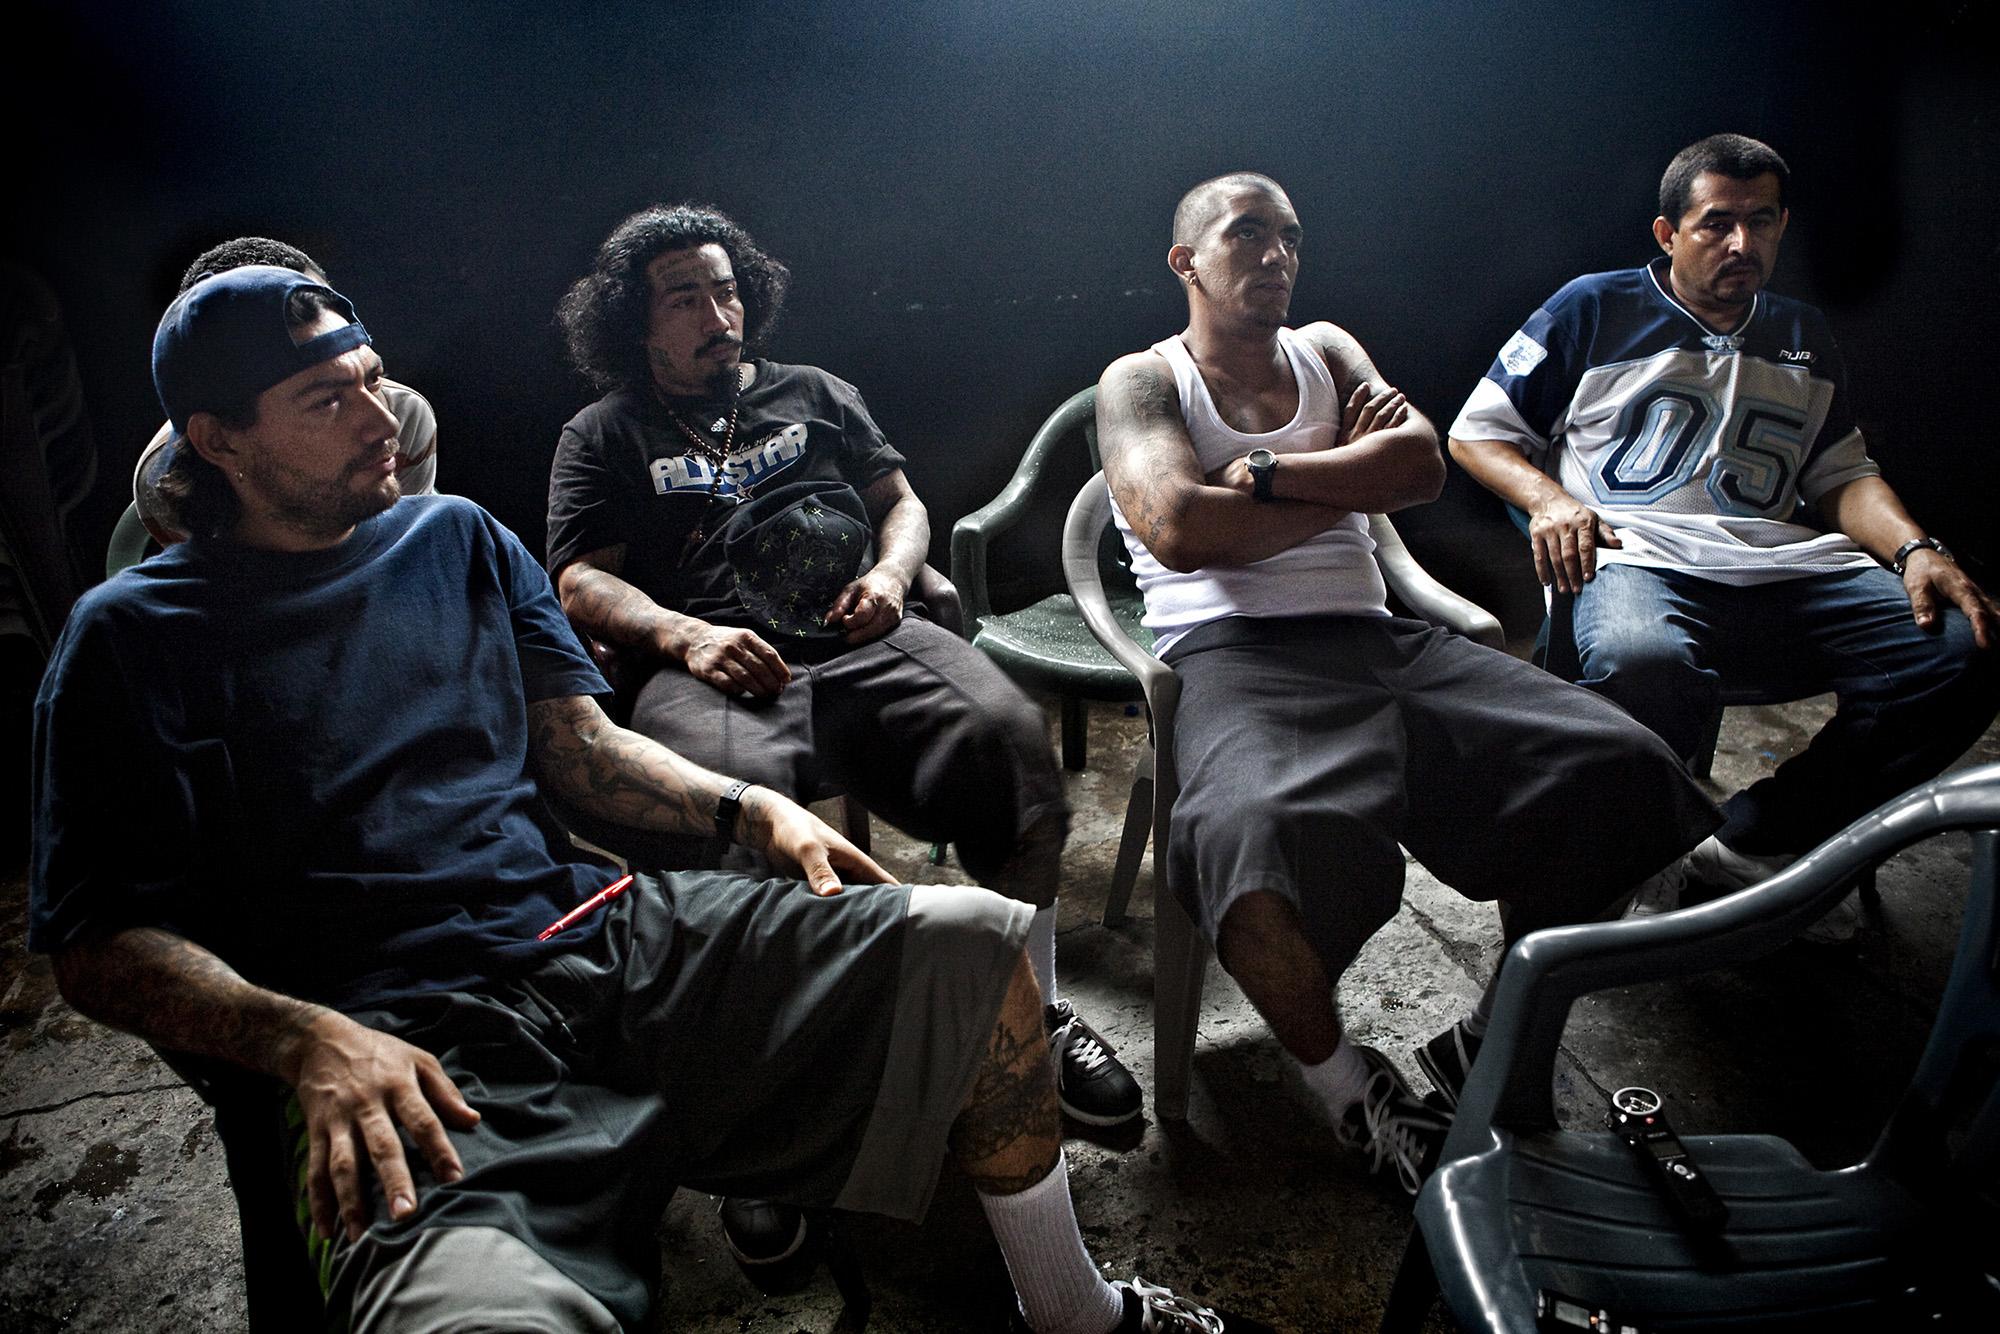 Interview with the ranfla of MS-13 in the Ciudad Barrios Prison in San Miguel on September 27, 2012. El Diablo of Hollywood sits center-right in a white tank-top. Photo: Pau Coll - Ruido Photo/El Faro